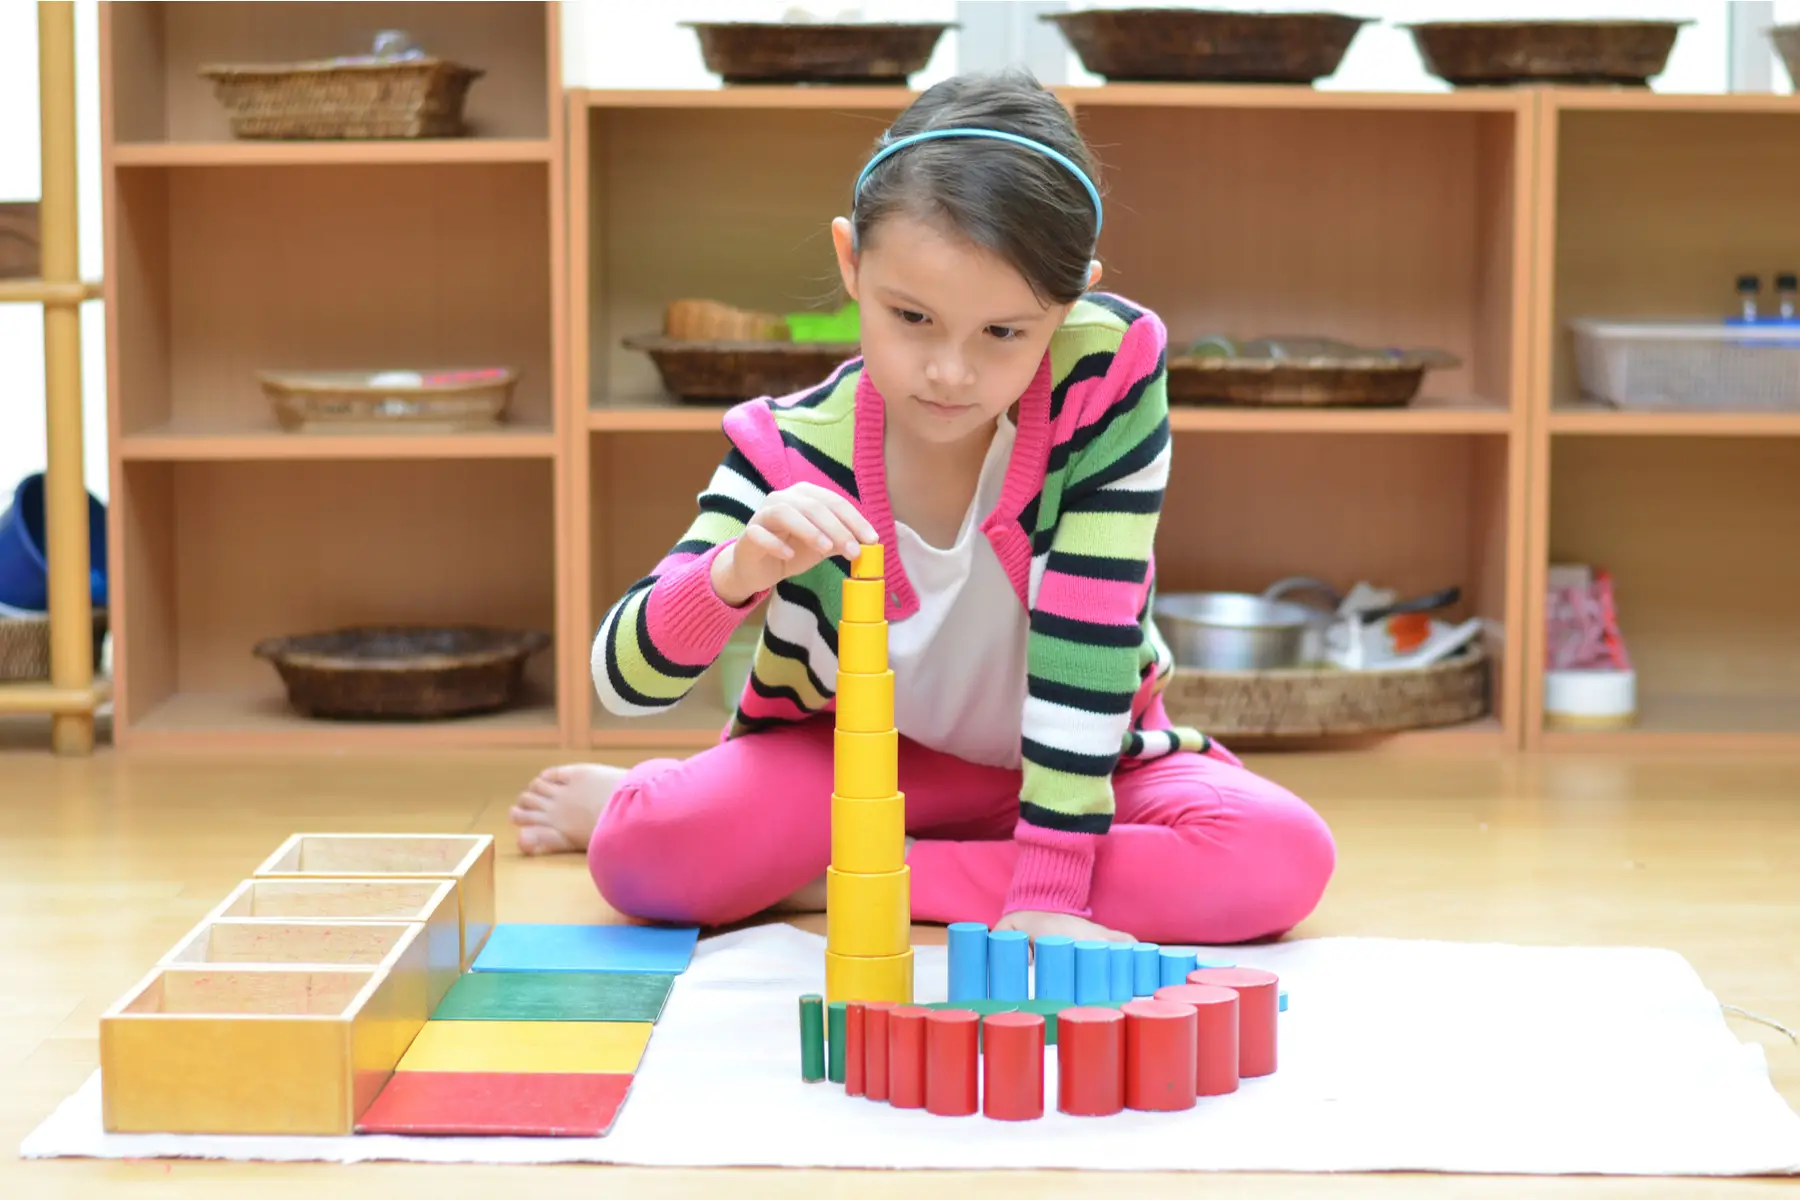 UK education system - child working with Montessori materials in class